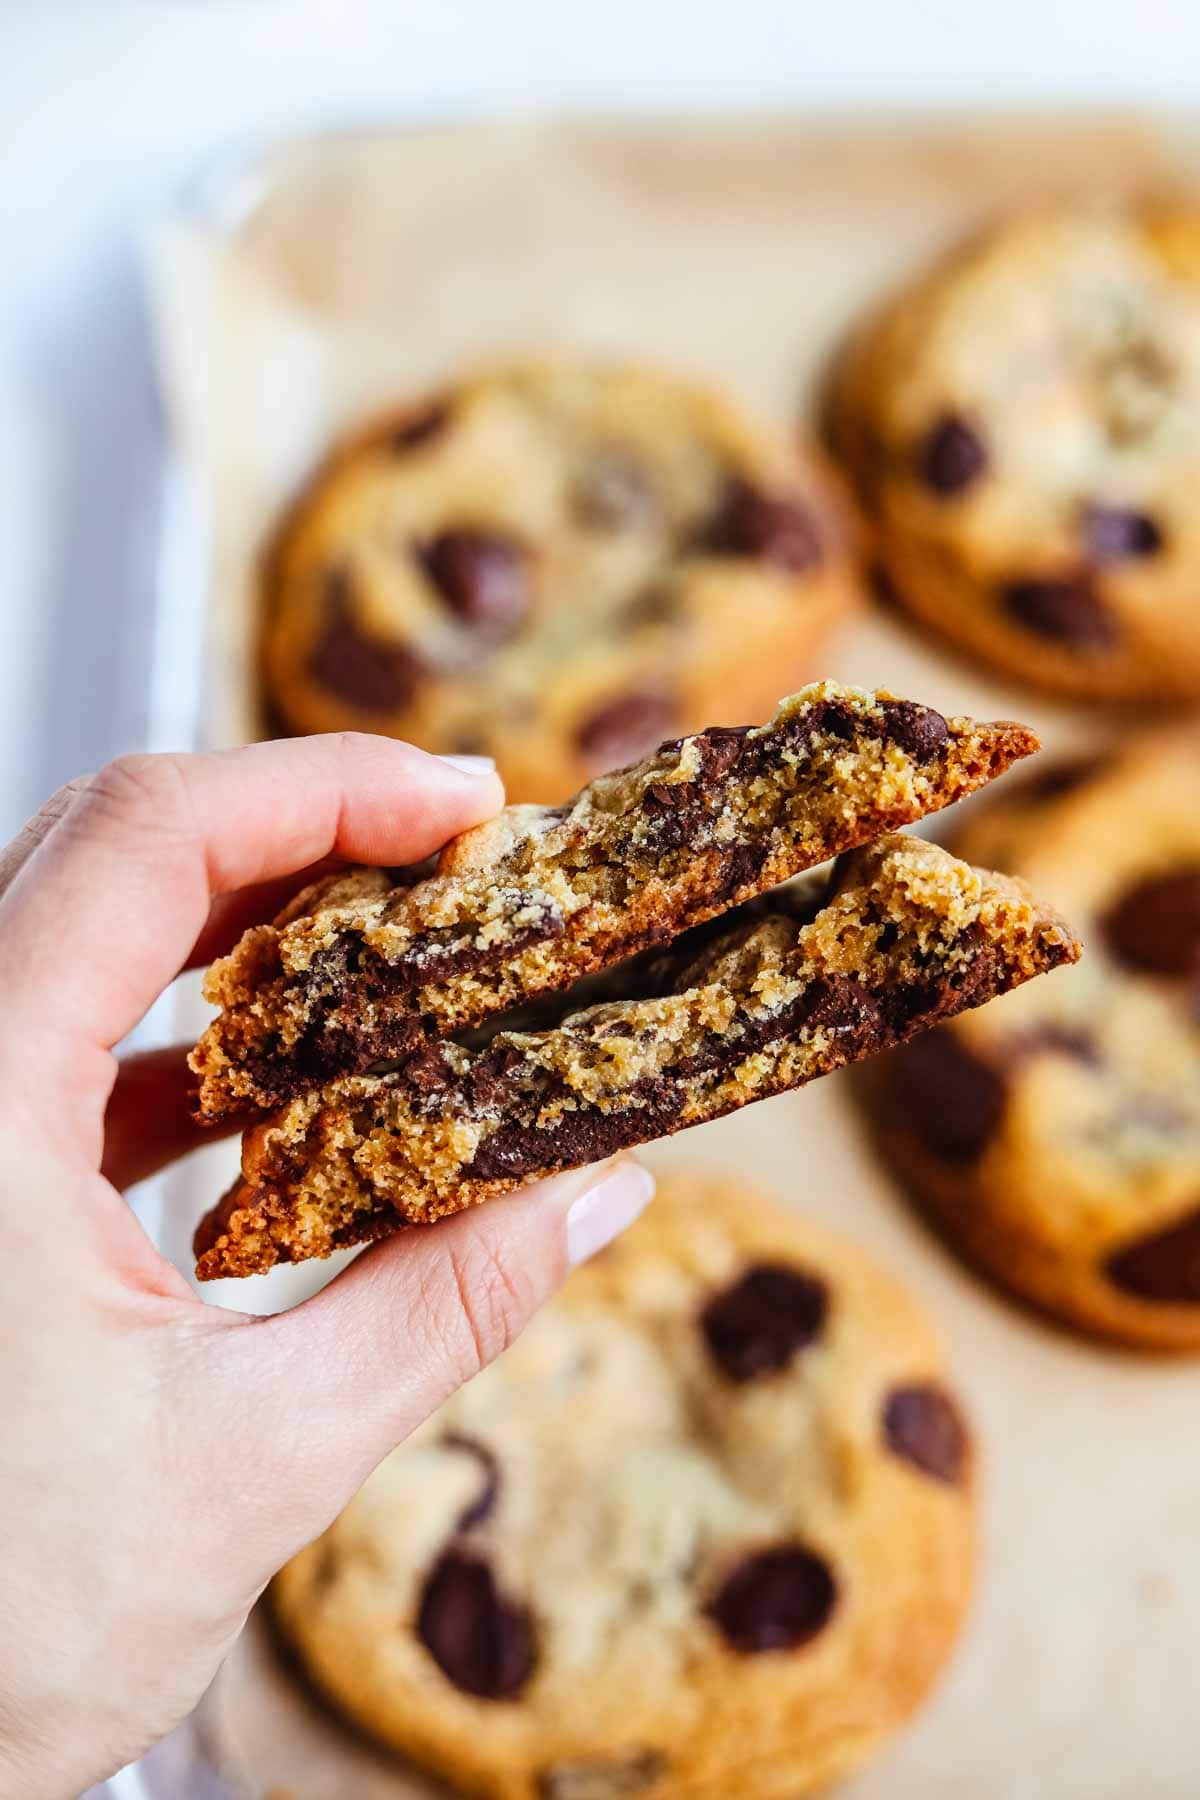 Hand holding a stack of giant bakery-style chocolate chip cookies cut in half to show the melted chocolate inside.